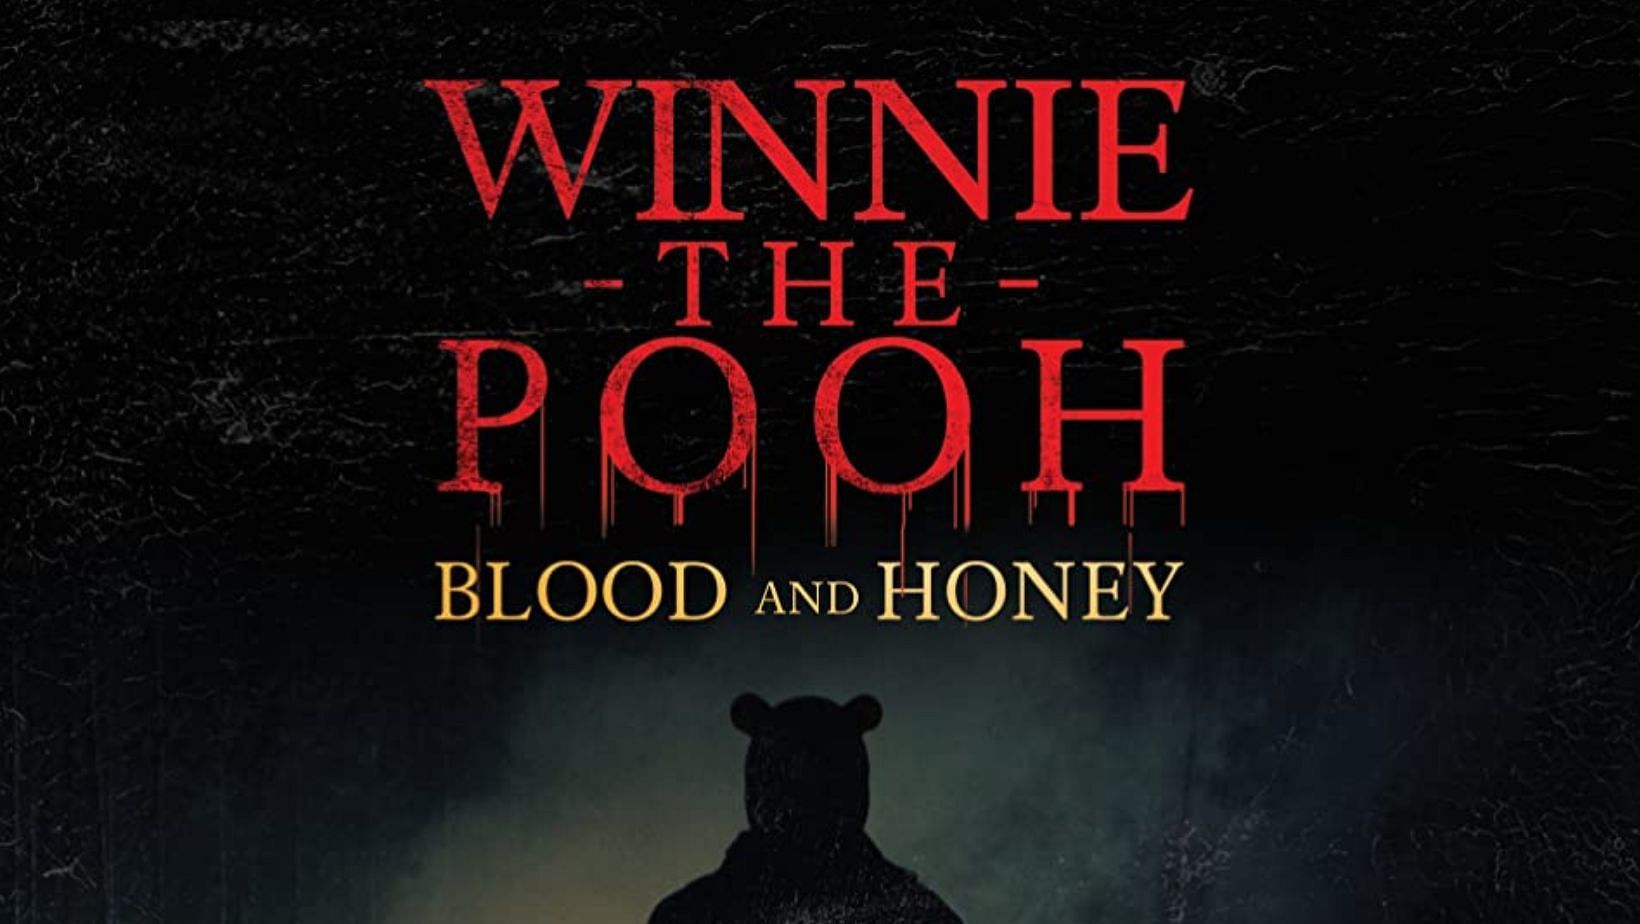 Controversial film Winnie The Pooh: Blood and Honey receives death threats ahead of release (Image via Jagged Edge Productions)